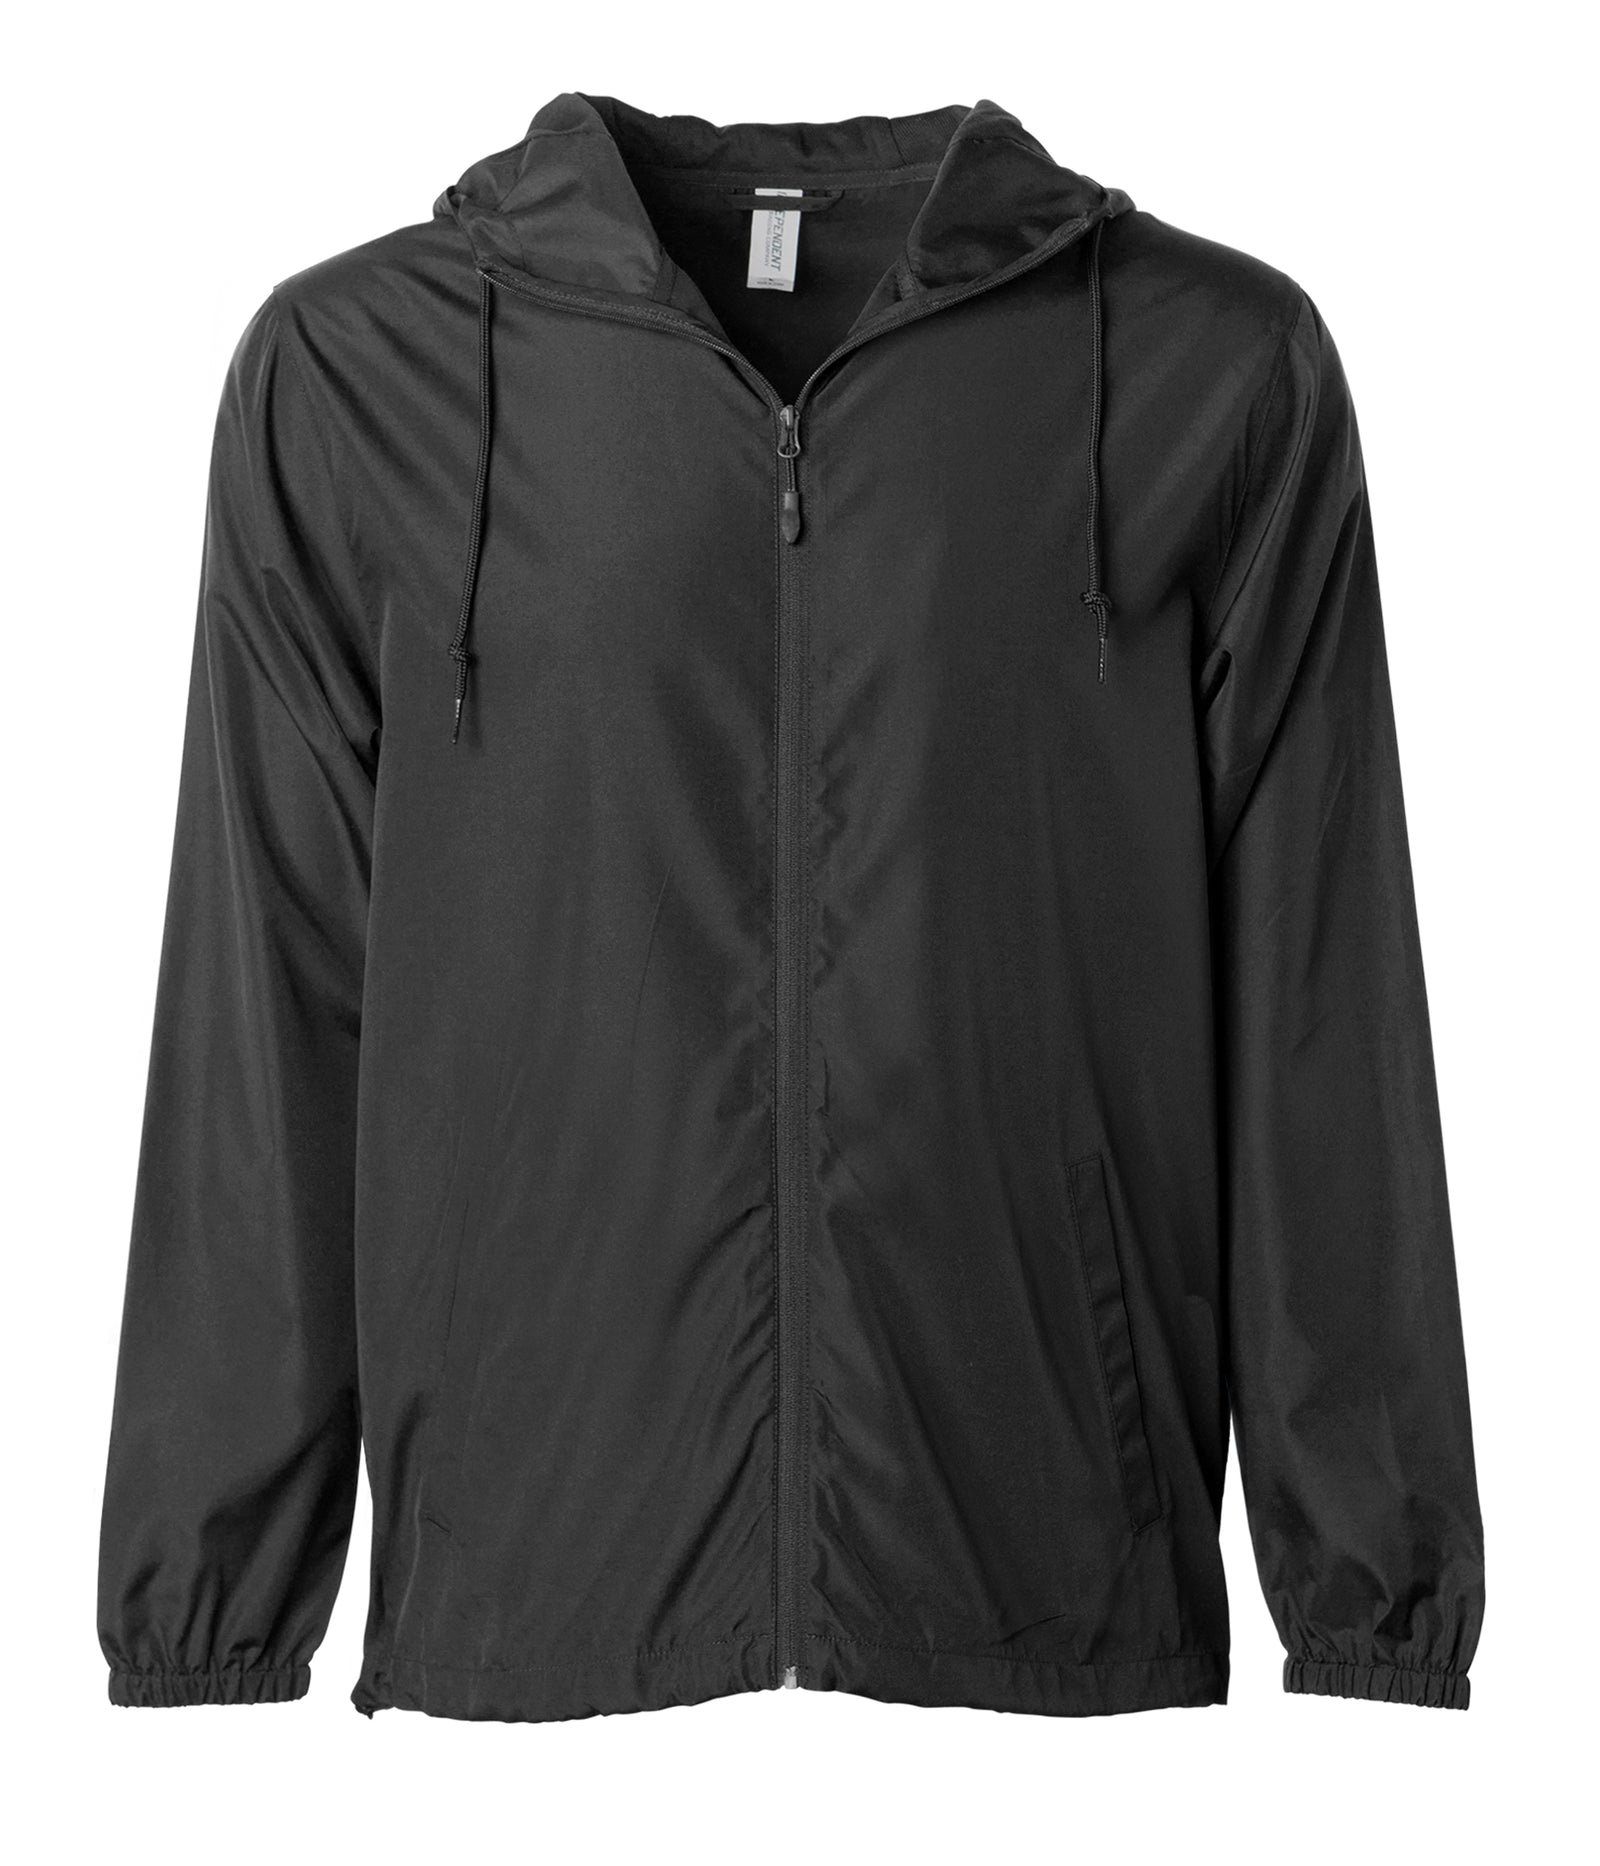 Lightweight Windbreaker Jacket | Solid Colors - Independent Trading Company